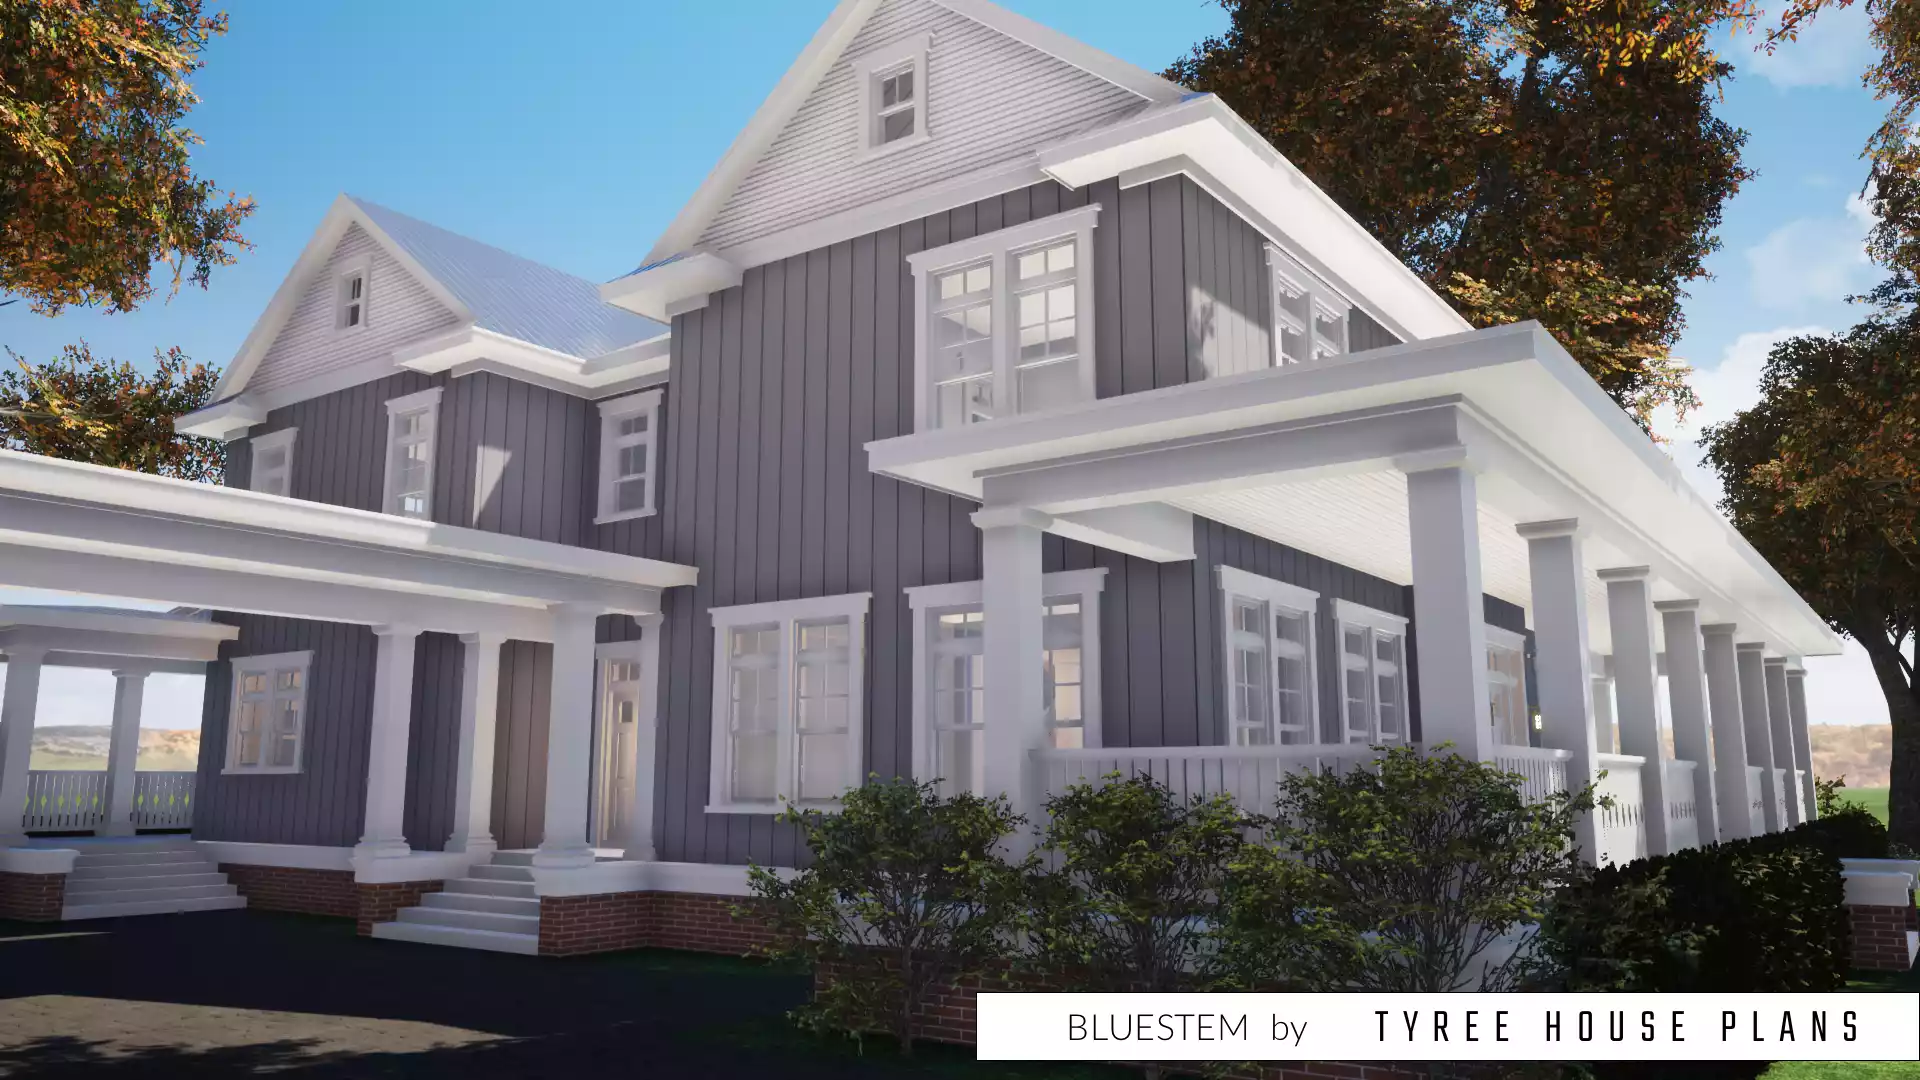 Left side of house. Bluestem by Tyree House Plans.